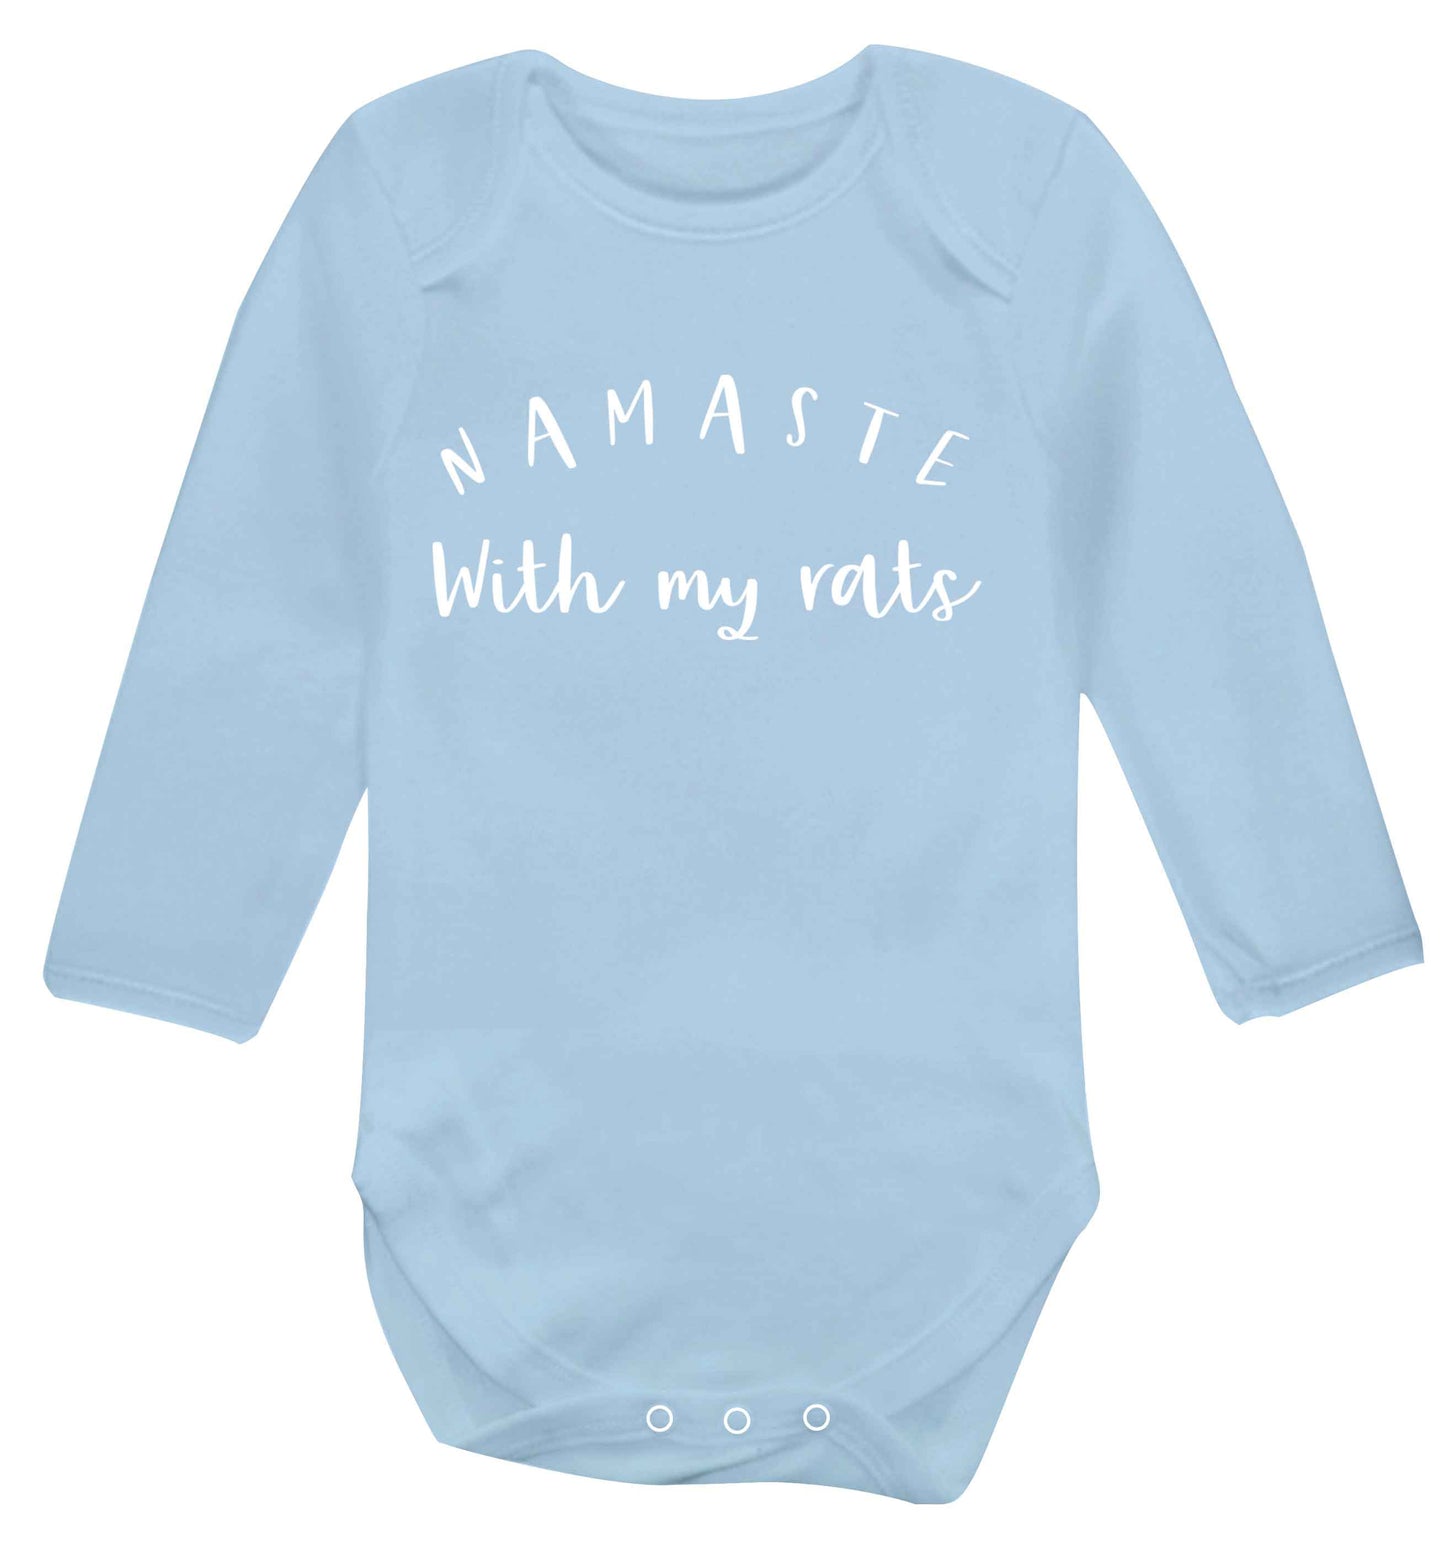 Namaste with my rats Baby Vest long sleeved pale blue 6-12 months